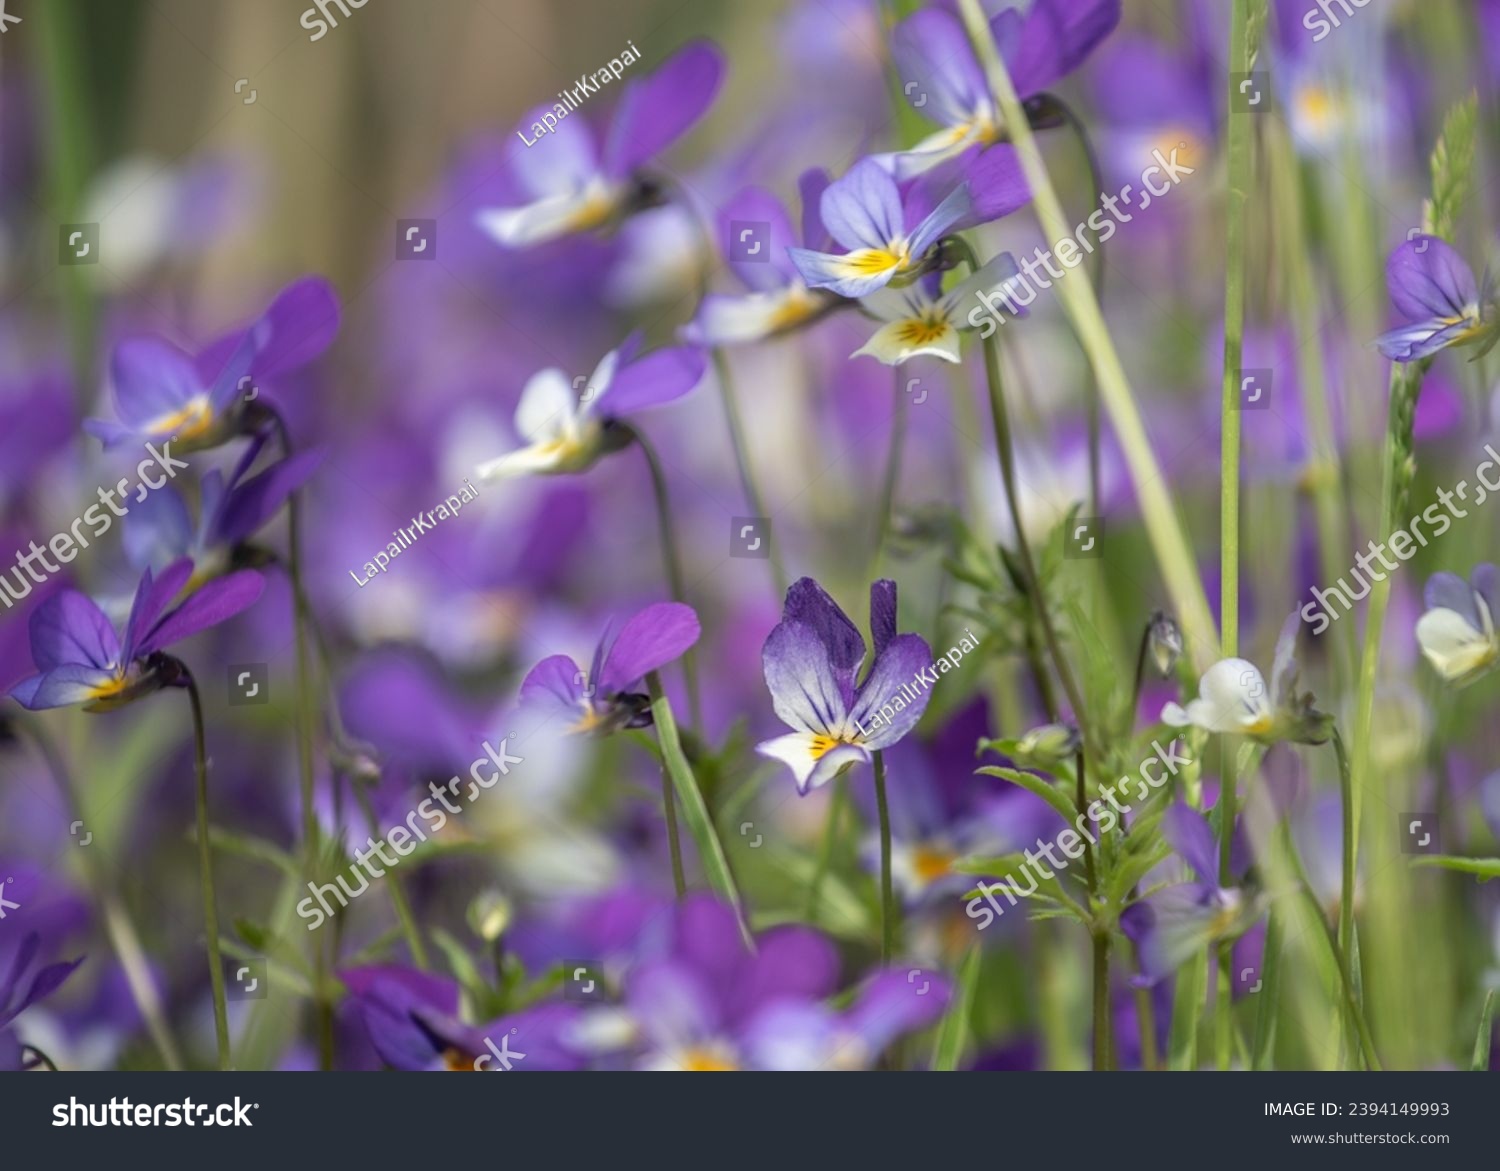 Viola tricolor is a common European wild flower, growing as an annual or short-lived perennial. The species is also known as wild pansy #2394149993